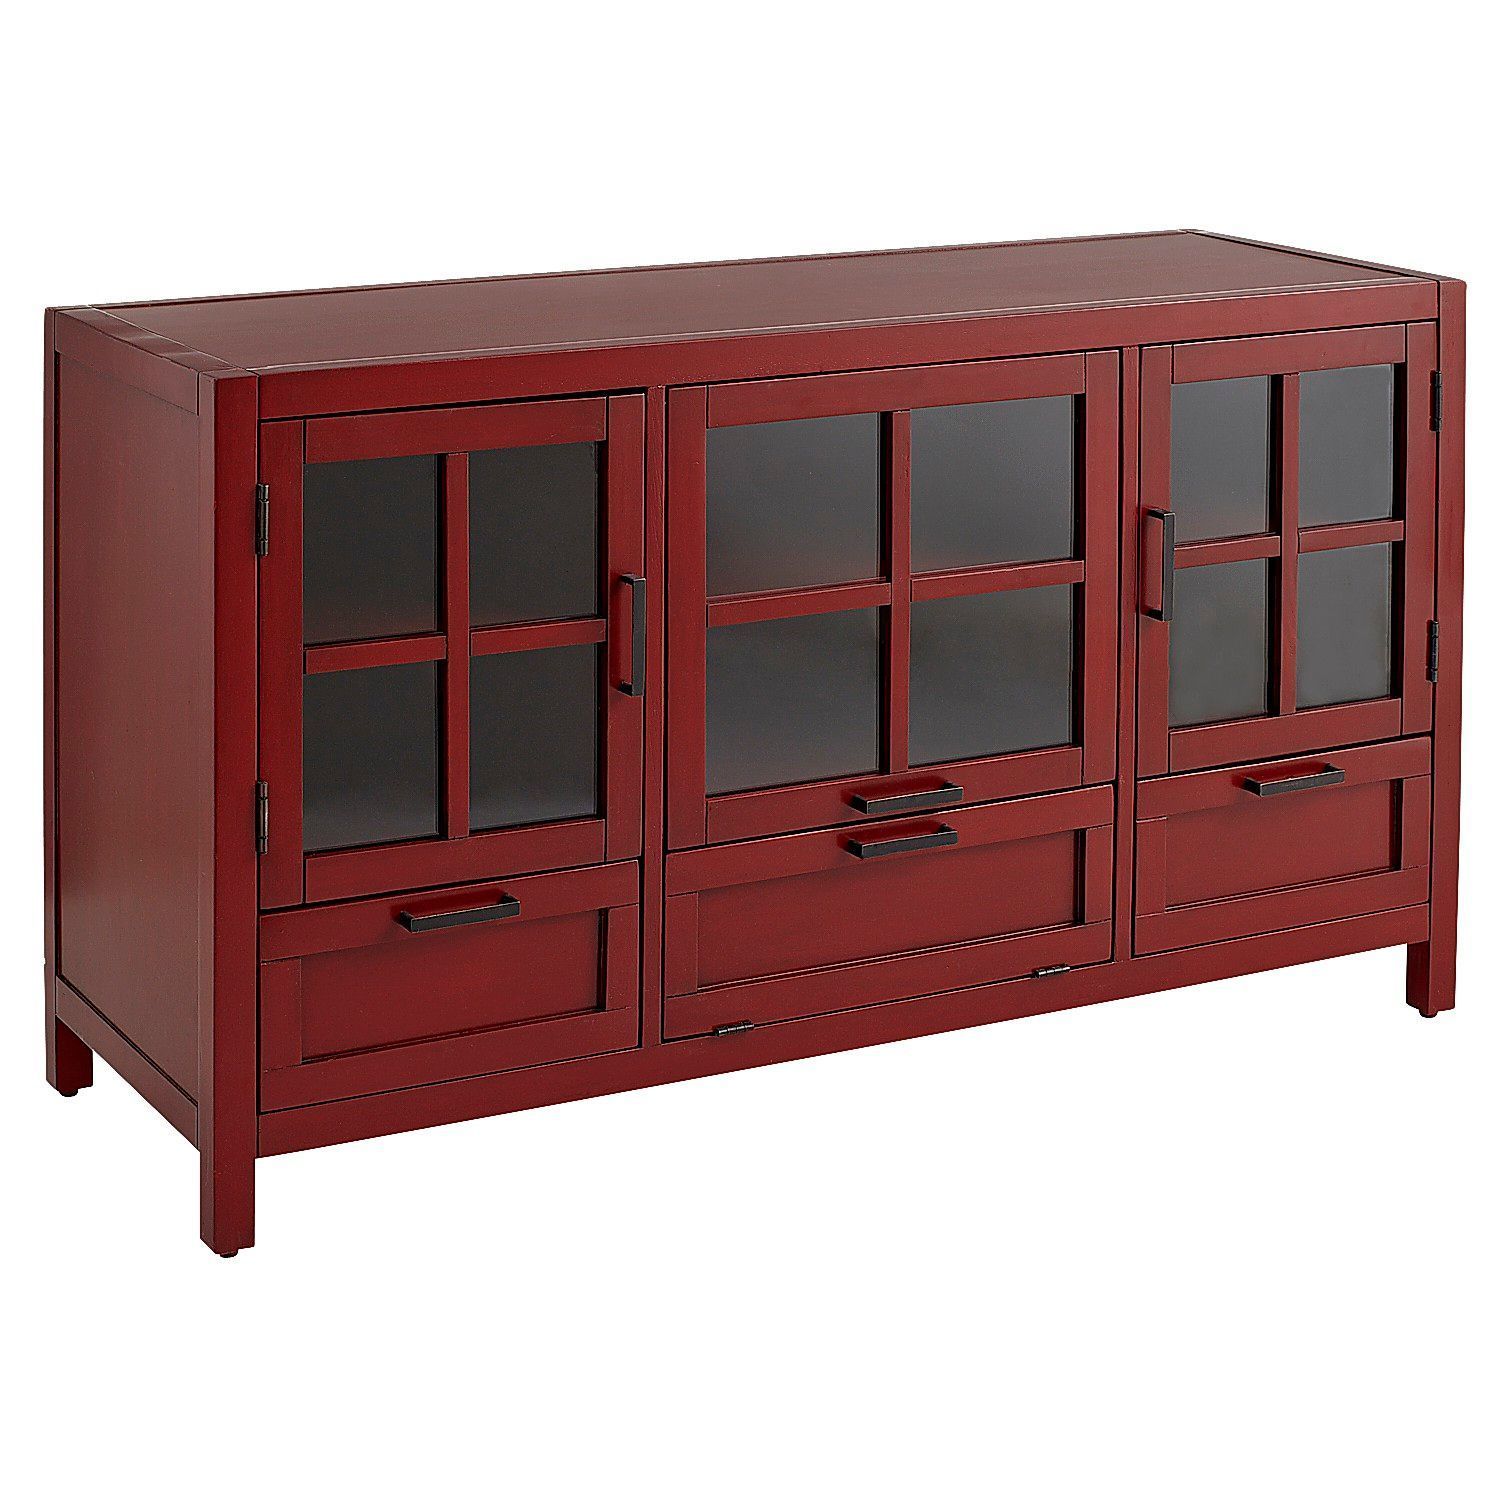 Sausalito Antique Red Modular 52" Tv Stand | Basement Pertaining To Modular Tv Stands Furniture (Photo 9 of 15)